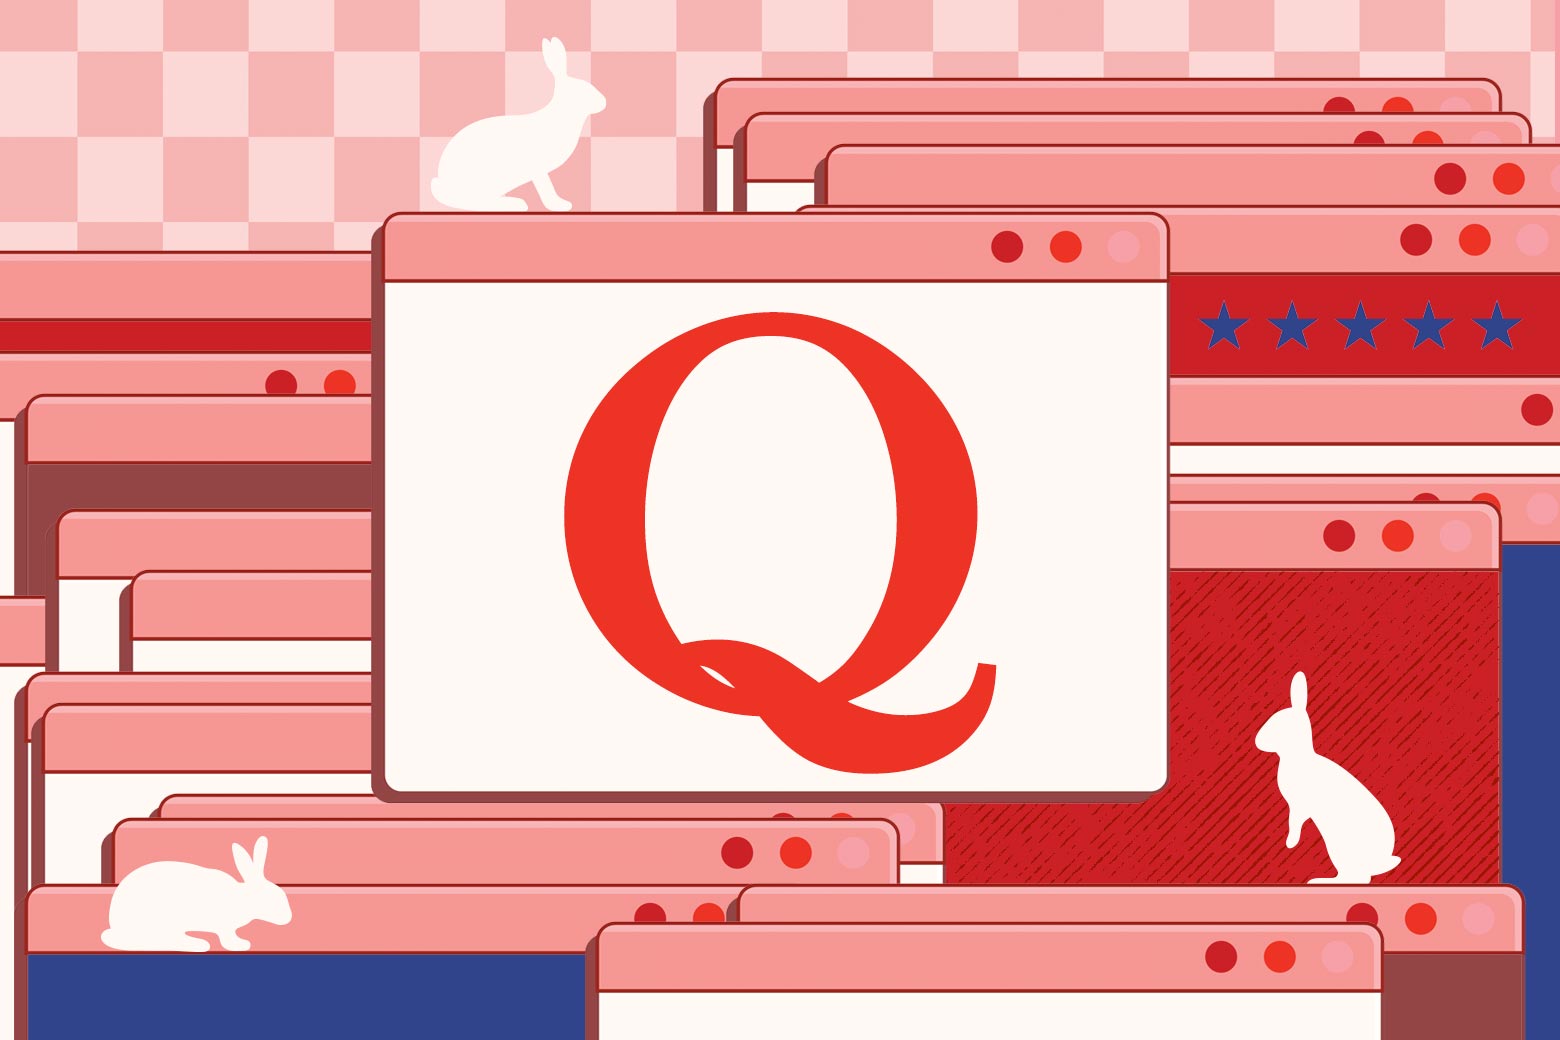 Illustration of a QAnon "Q" in the middle of a browser window, surrounded by a lot of other browser windows, some with silhouettes of rabbits on them and a chess/checkerboard at the top in the background.